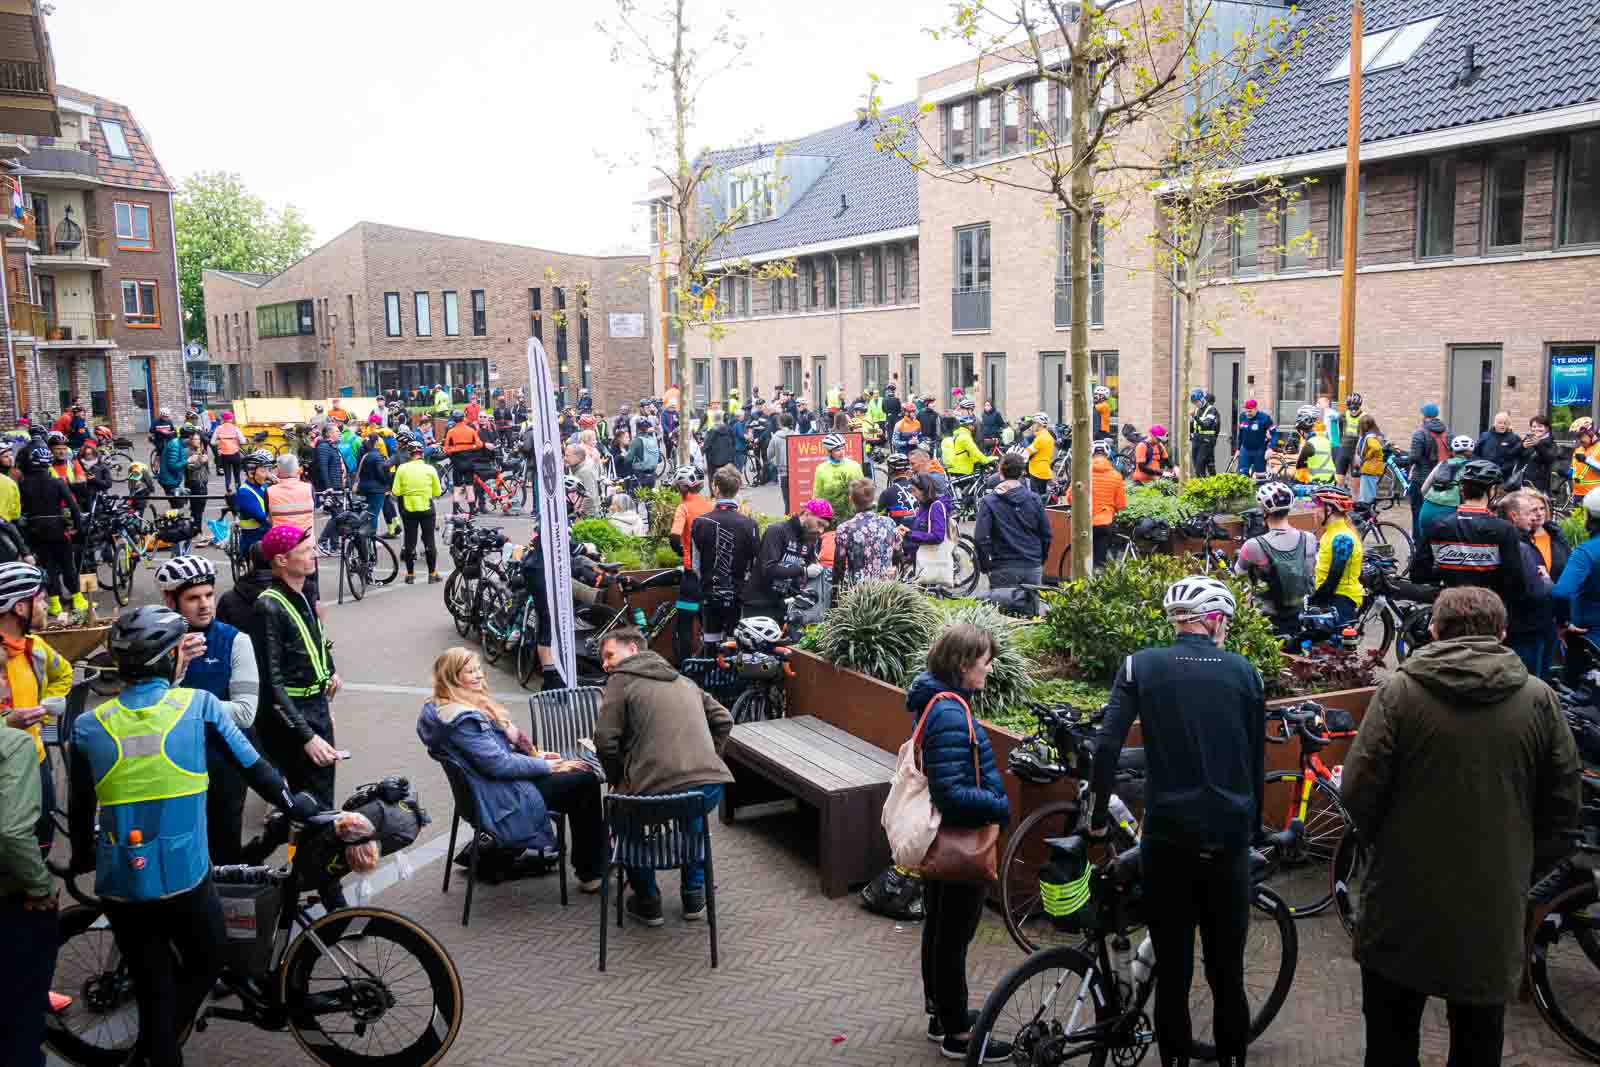 Many different cyclists stand in the starting area of the ultra-cycling event Race around the Netherlands